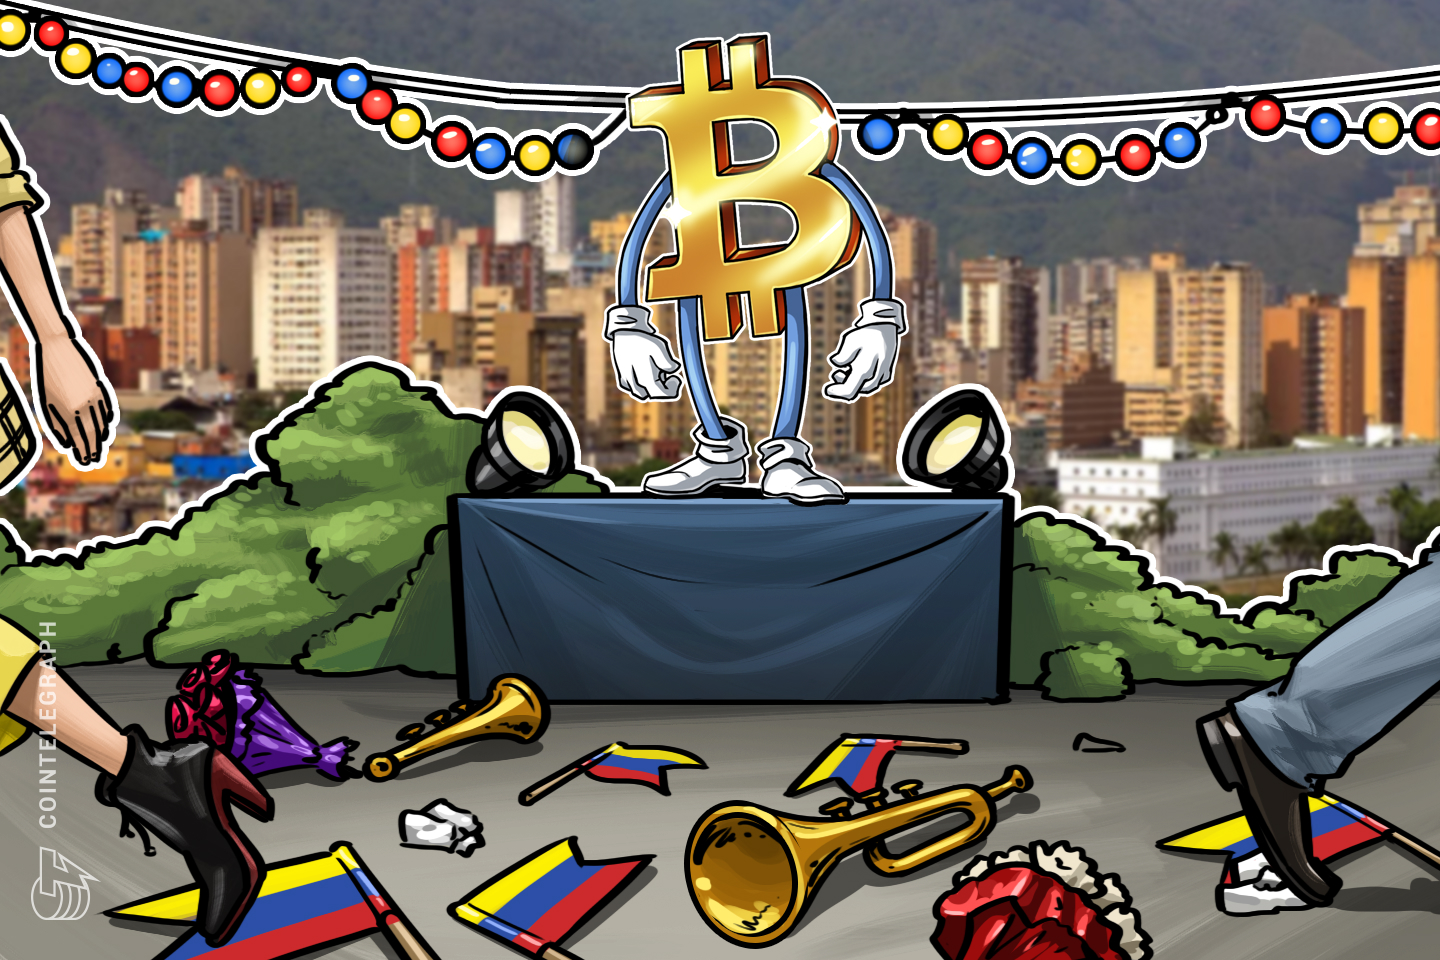 BTC Funds Reportedly Now Disabled for Venezuelan Passport Purchases